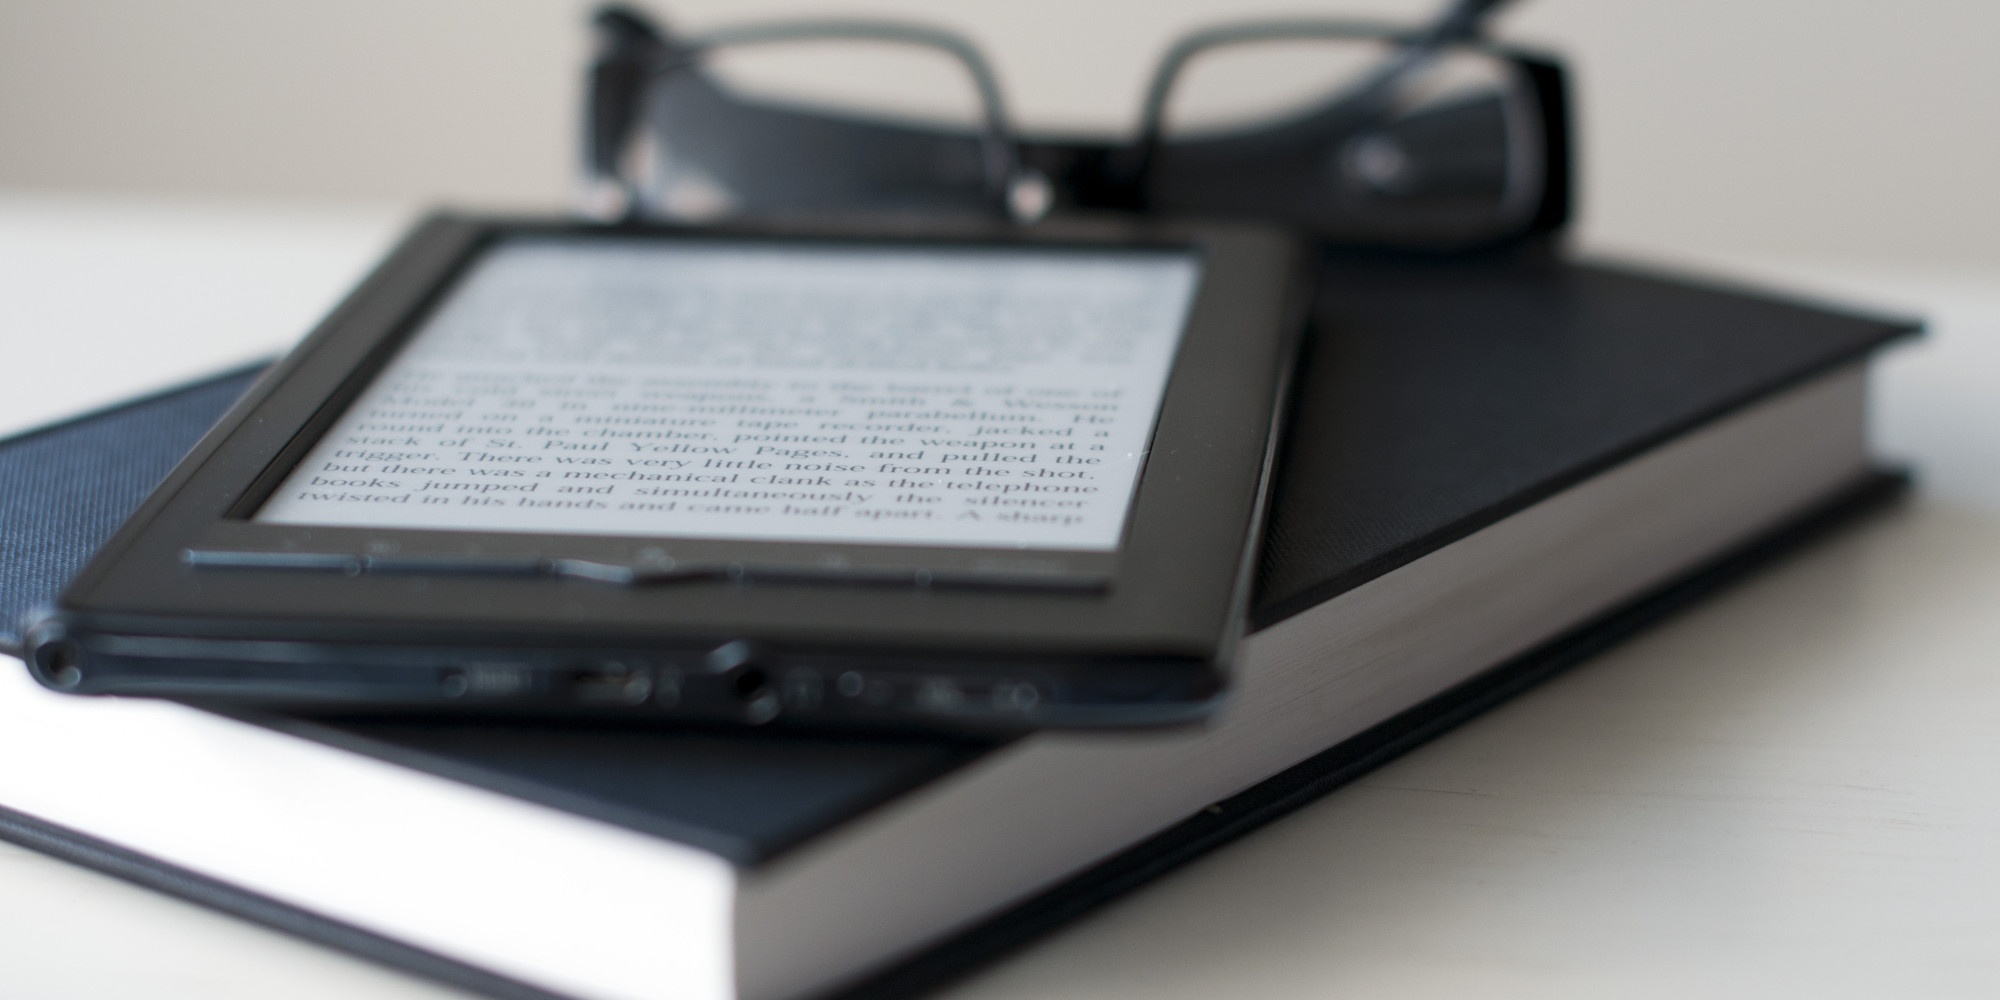 E-Reader and book with reading glasses